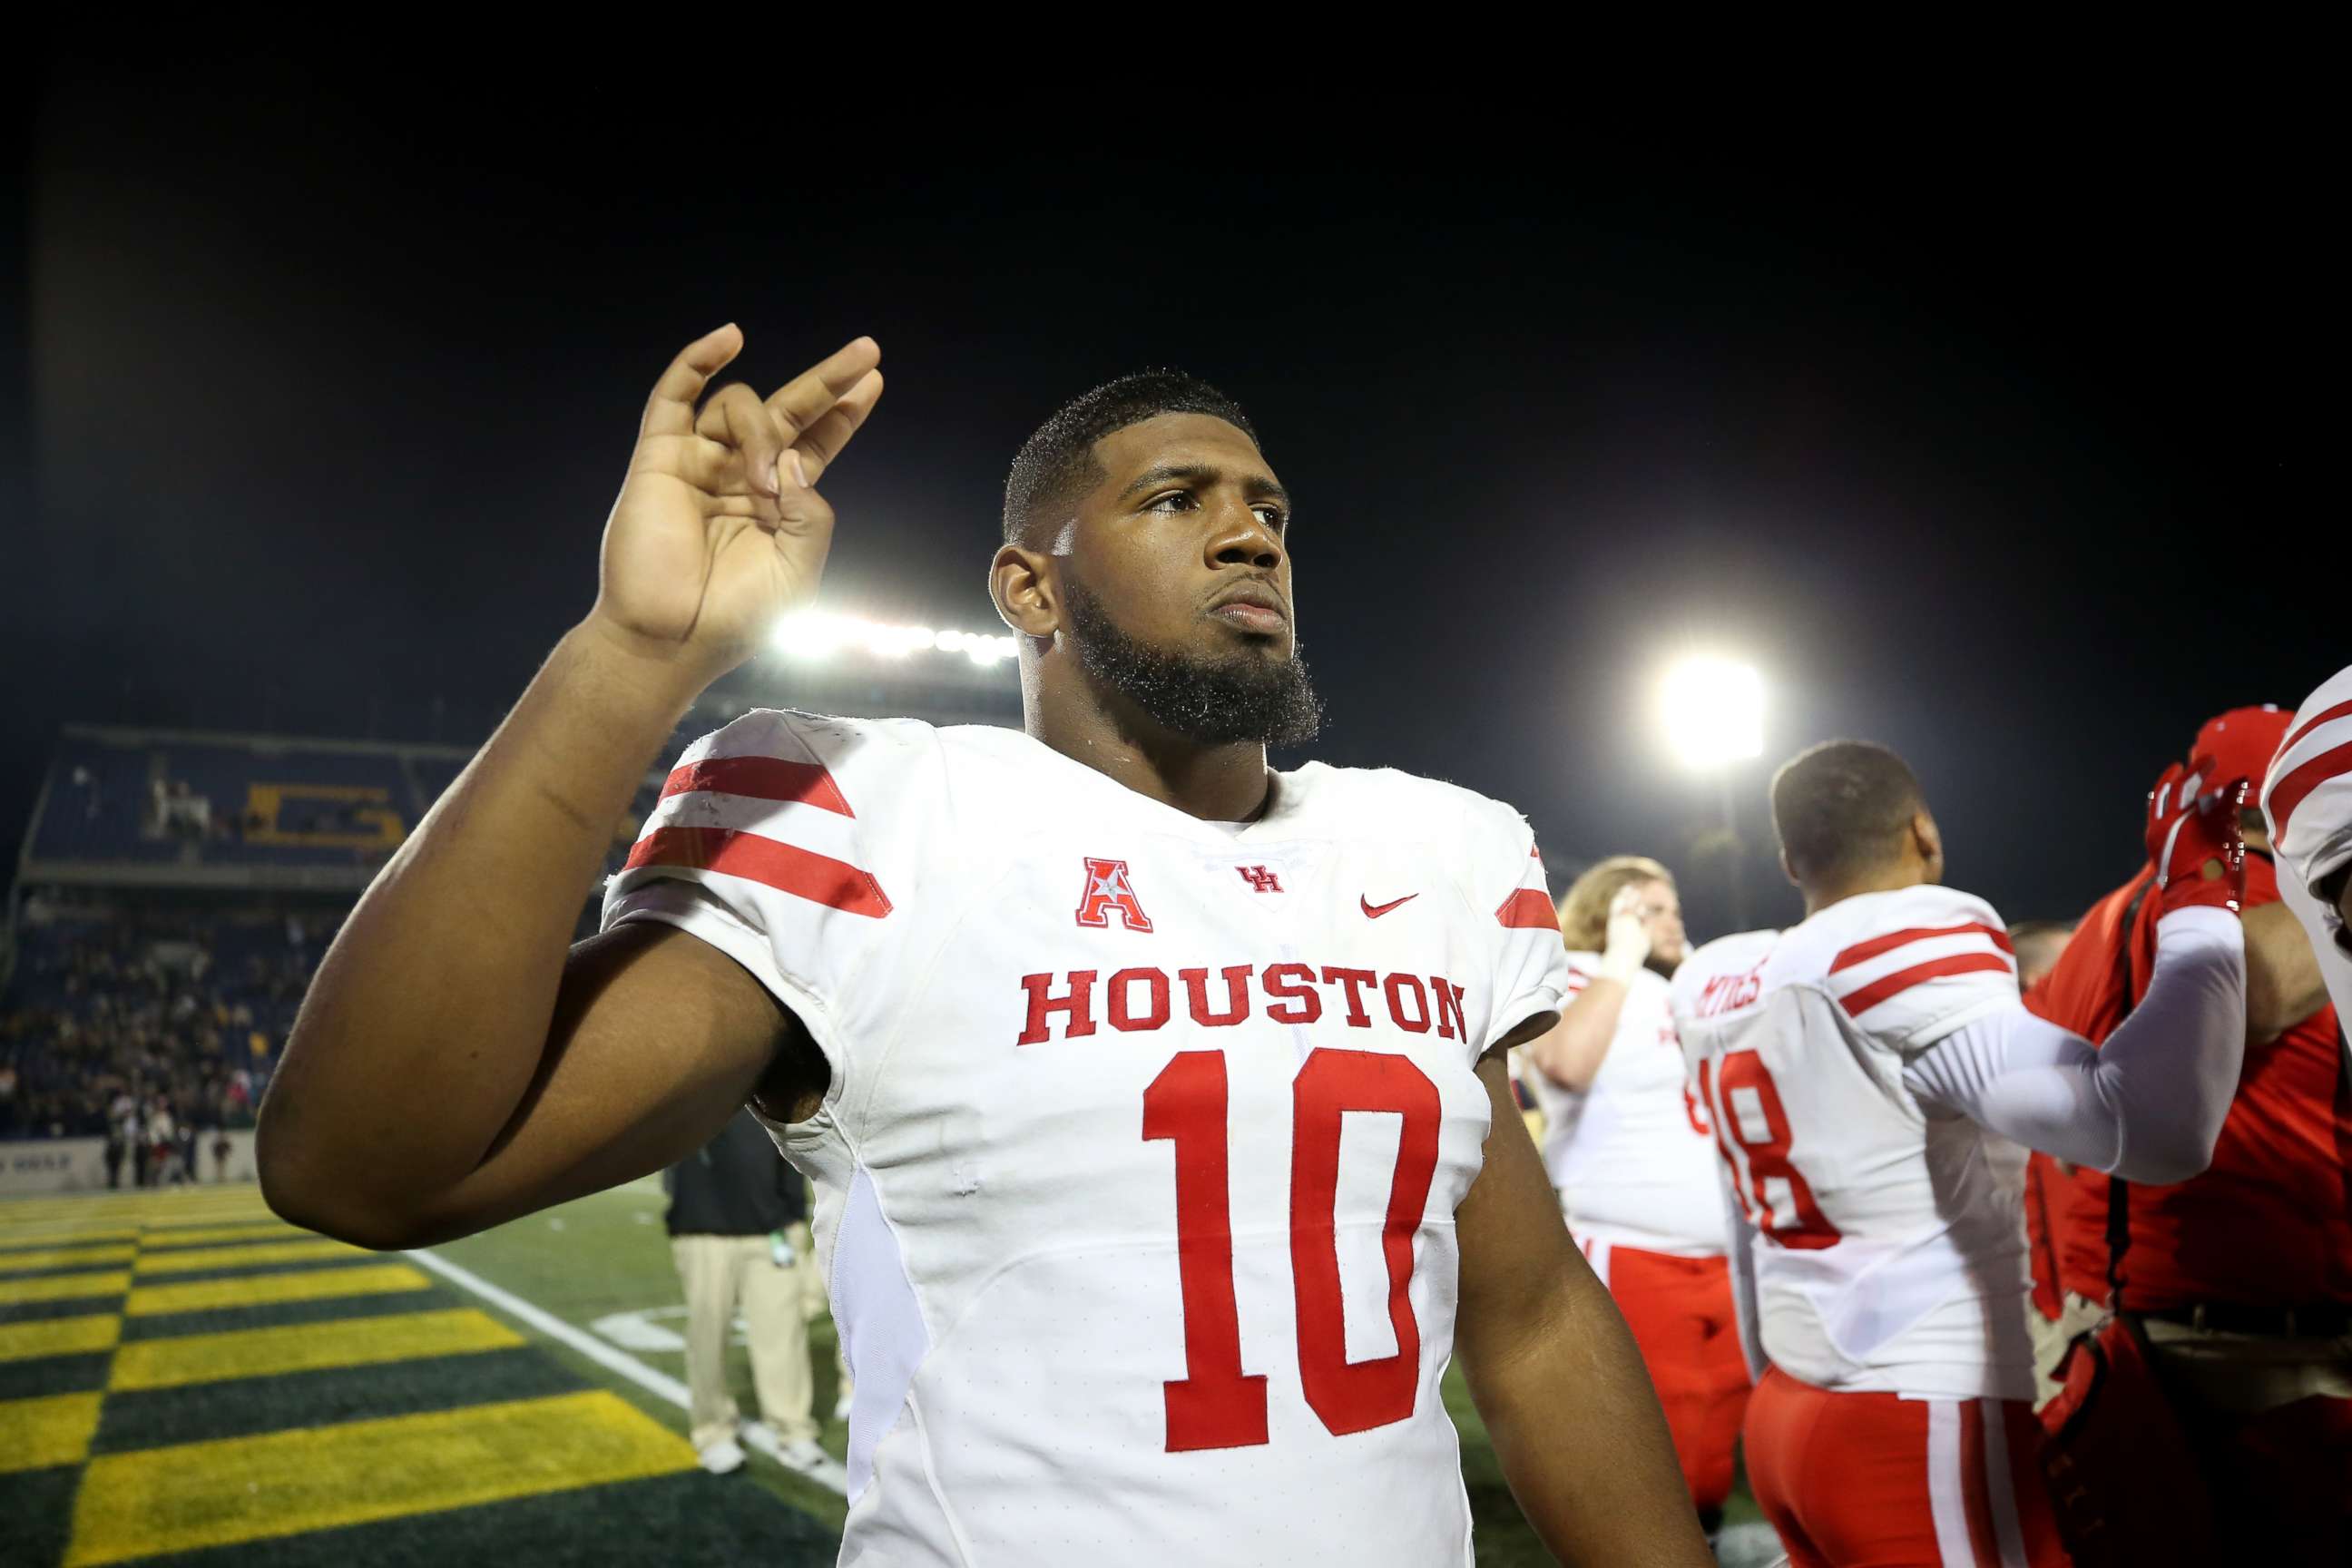 PHOTO: Ed Oliver of the Houston Cougars looks on after the Houston Cougars defeated the Navy Midshipmen at Navy-Marines Memorial Stadium on Oct. 20, 2018 in Annapolis, Md.